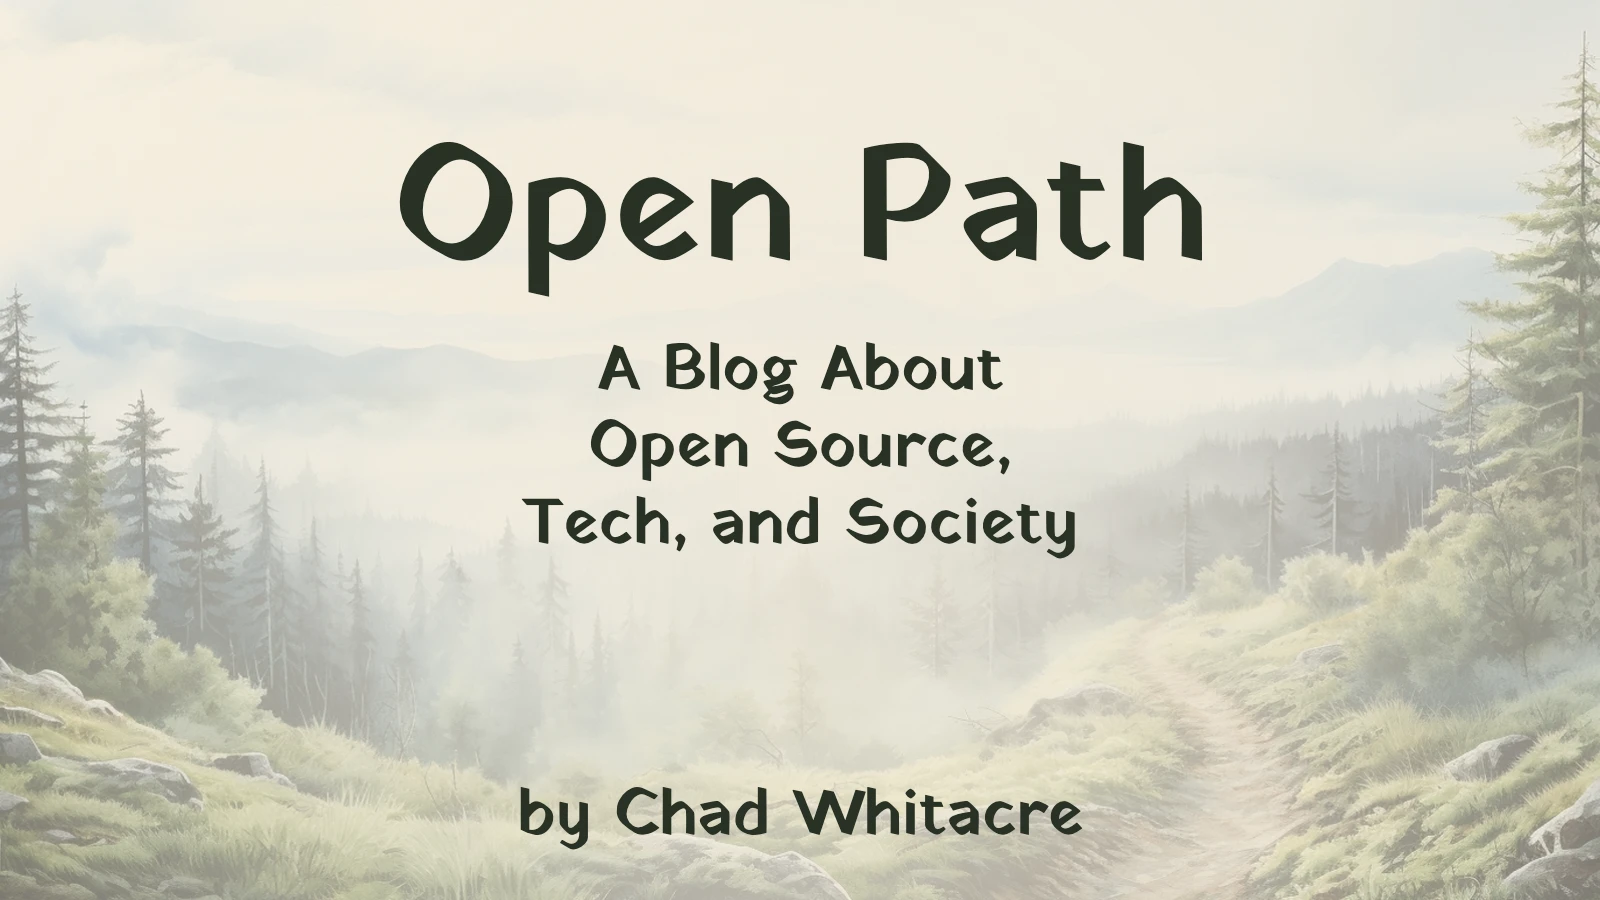 Open Path, a blog about Open Source, tech, and society, by Chad Whitacre